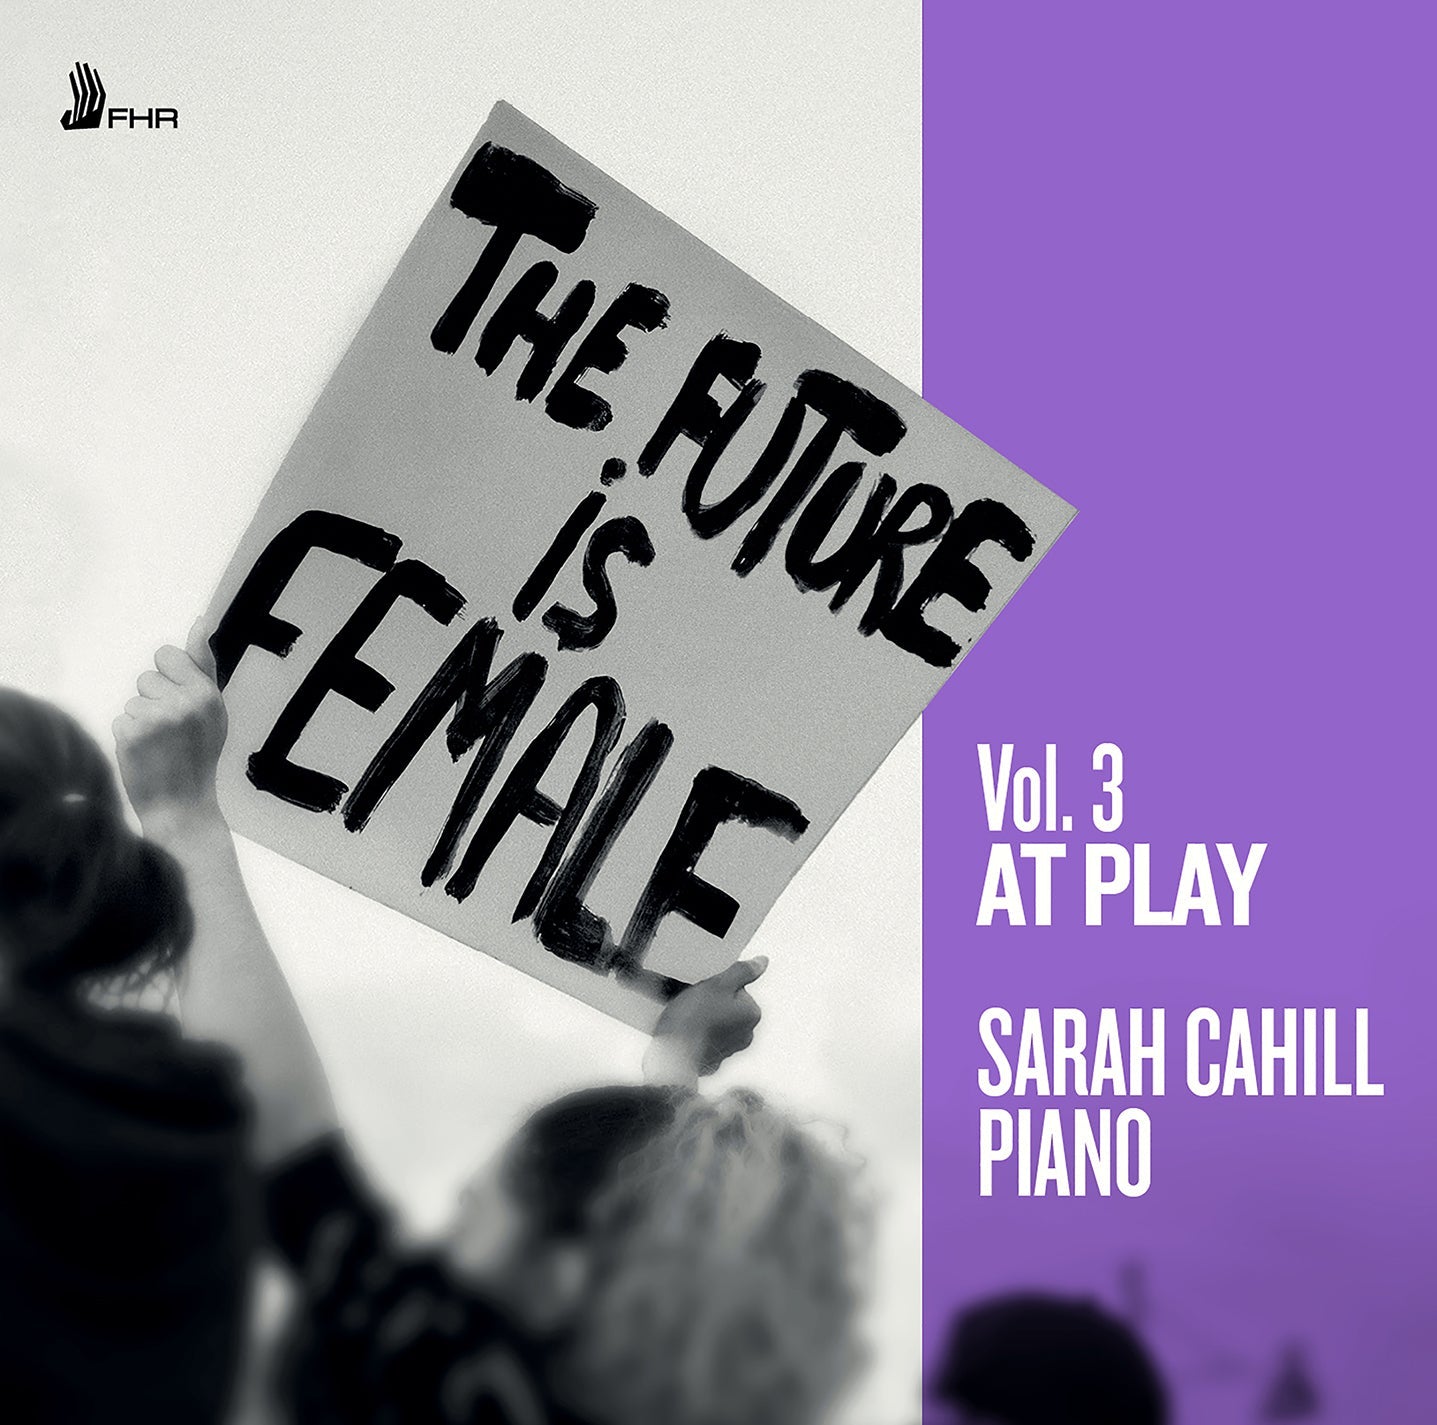 The Future Is Female, Vol. 3 - At Play